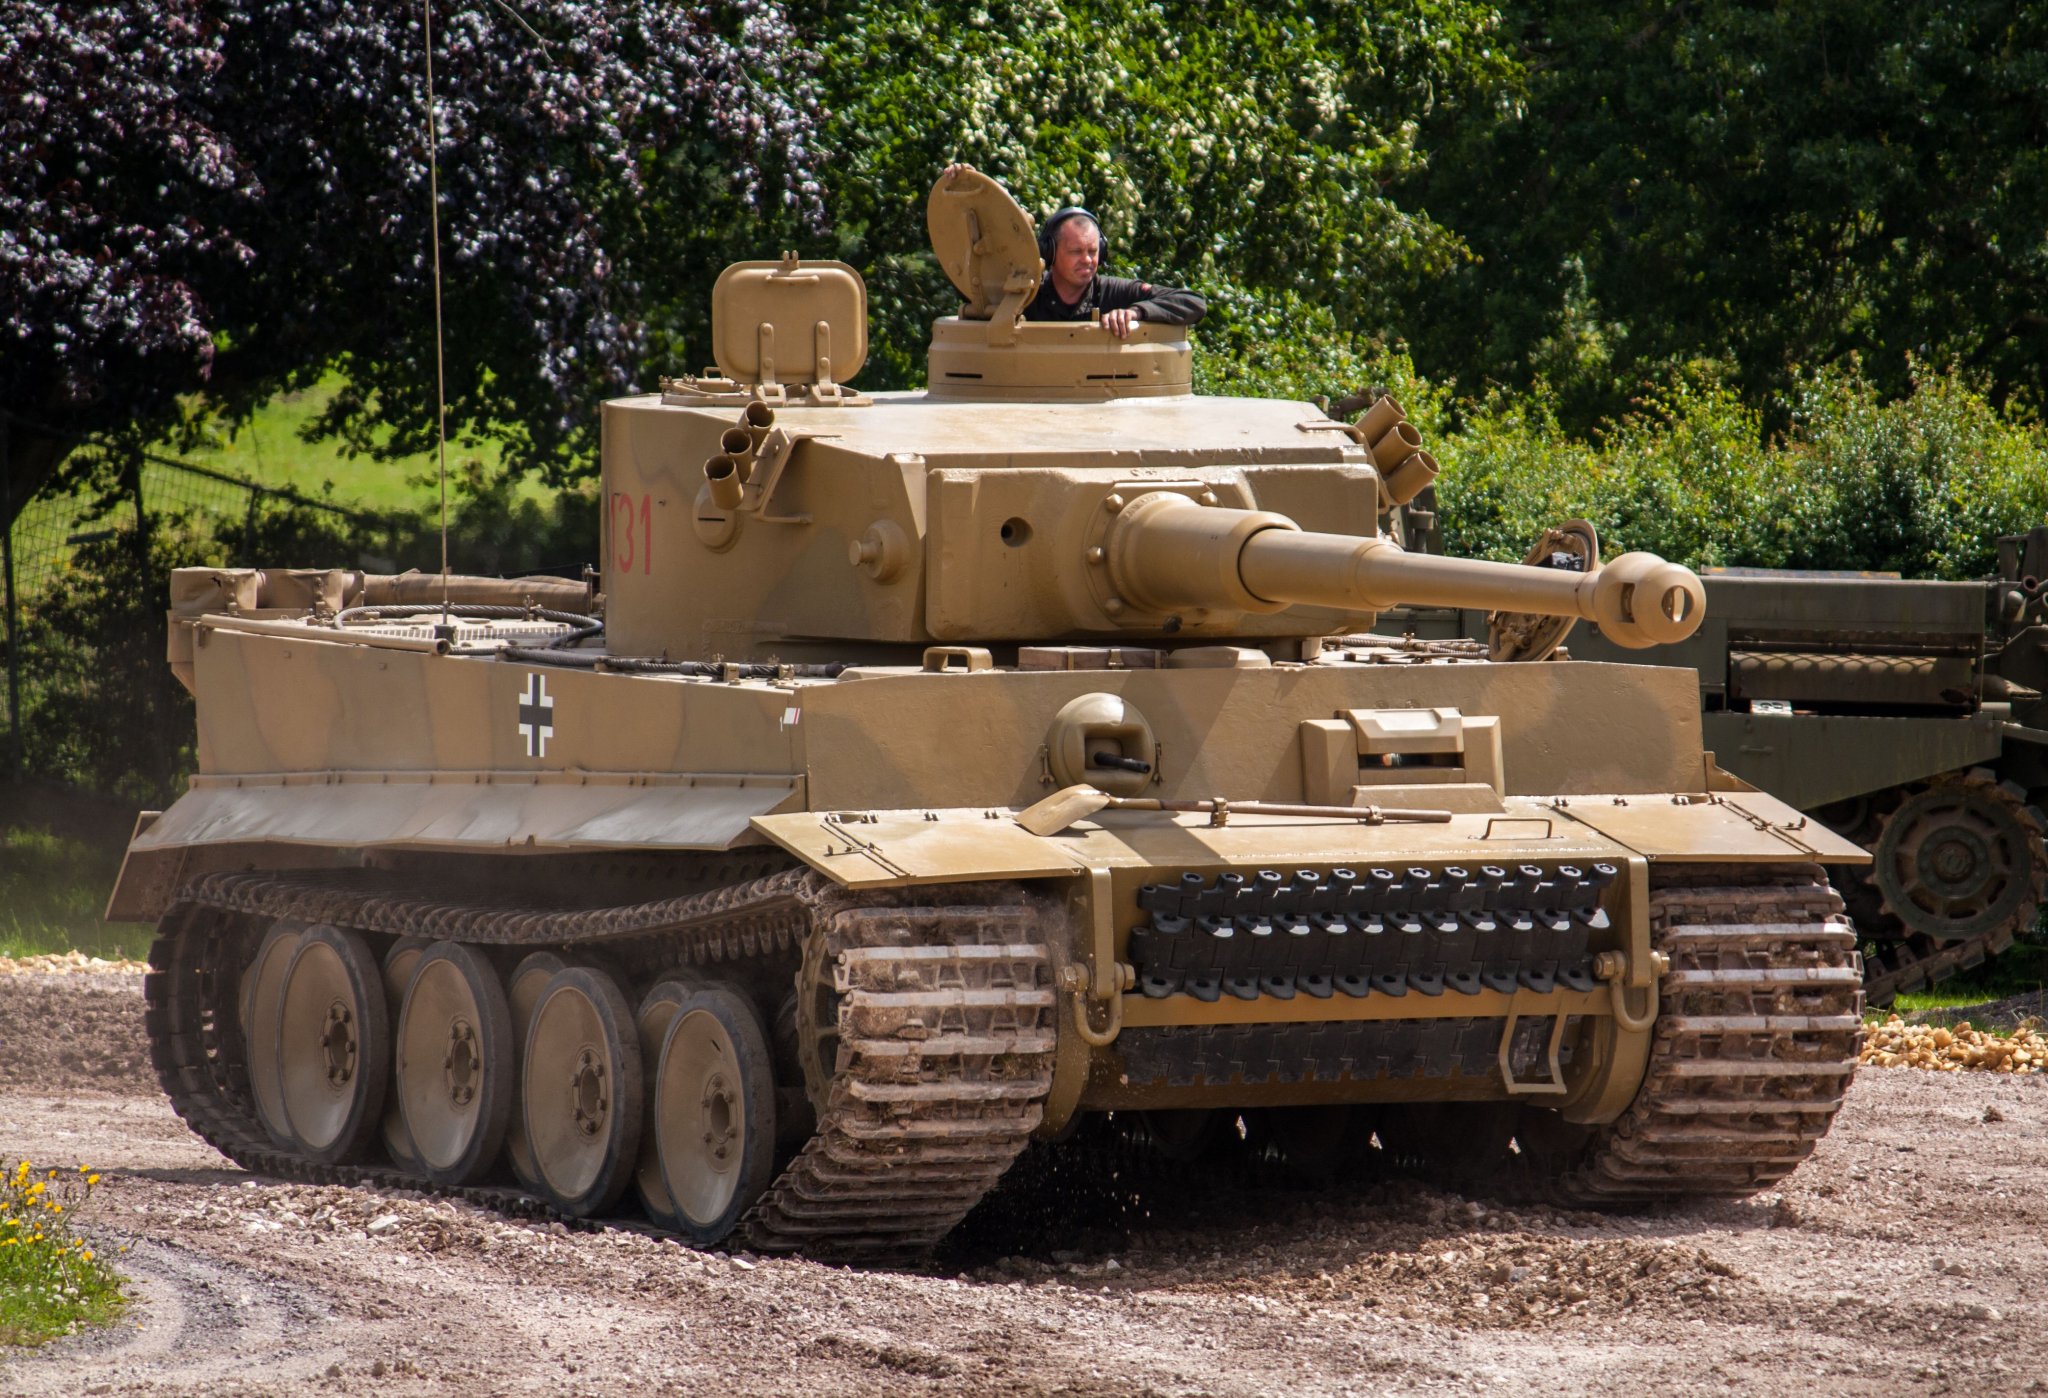 8 Reasons Why The Tiger Is The Most Overrated WW2 Tank